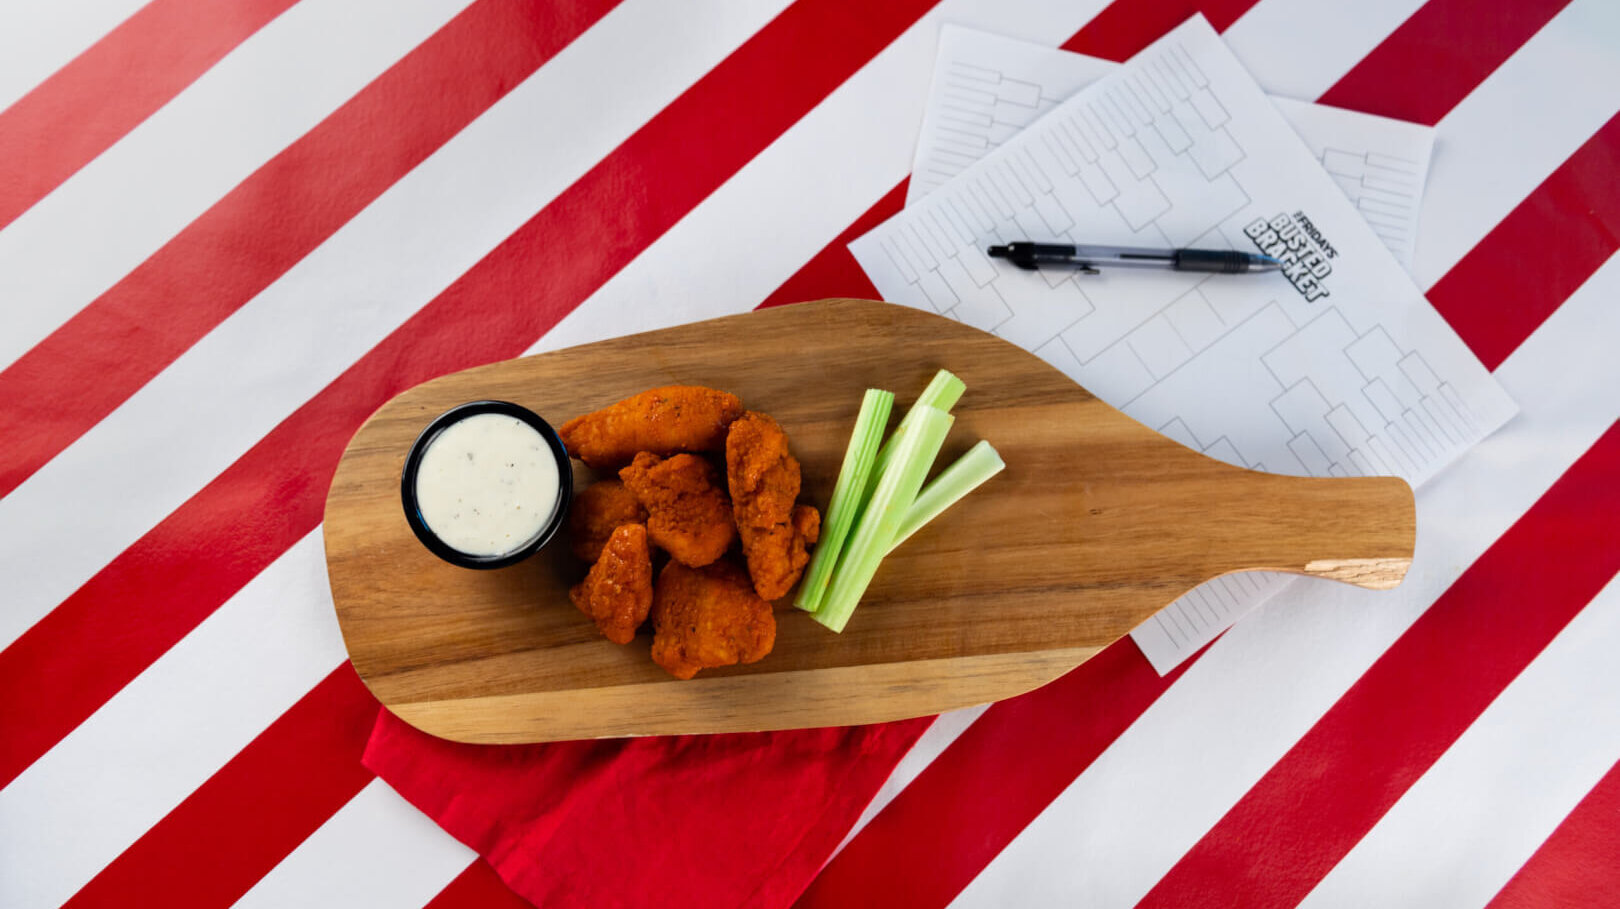 Get 6 free wings at TGI Fridays when your March Madness bracket busts